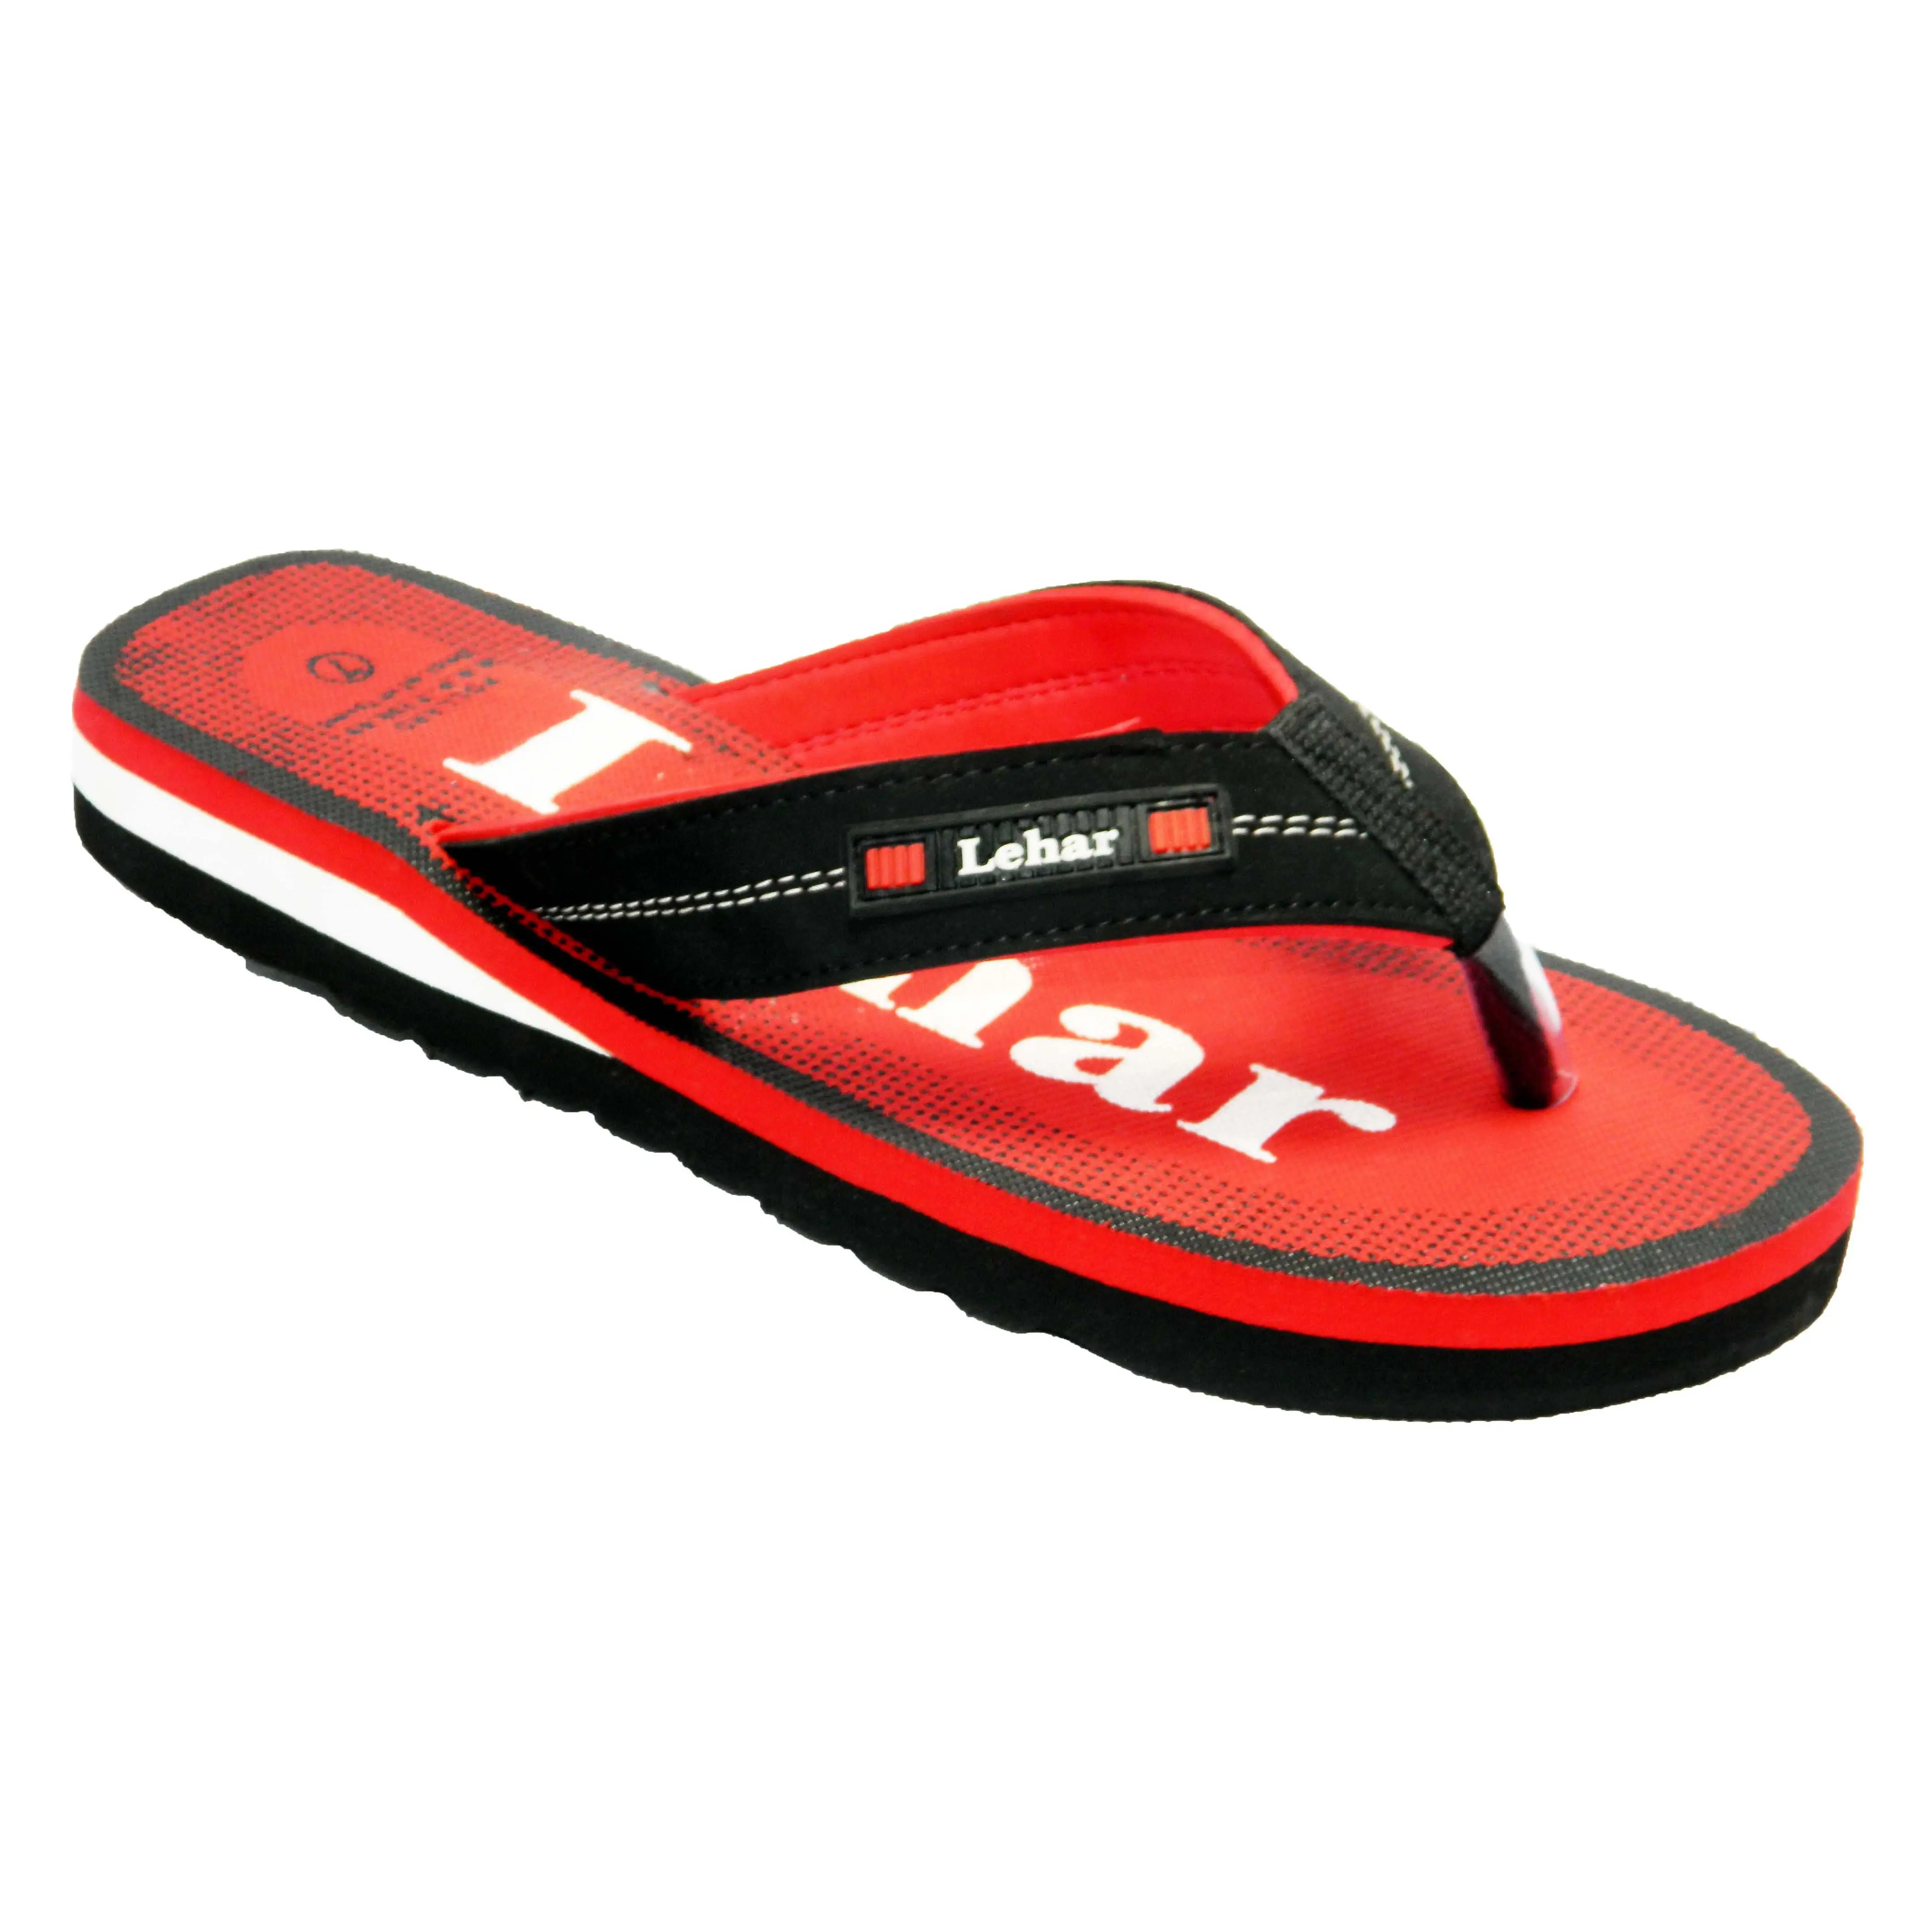 Fabricated Printed Slipper For indoor, Home Use And Summer Season Soft and Comfortable Thick Sole